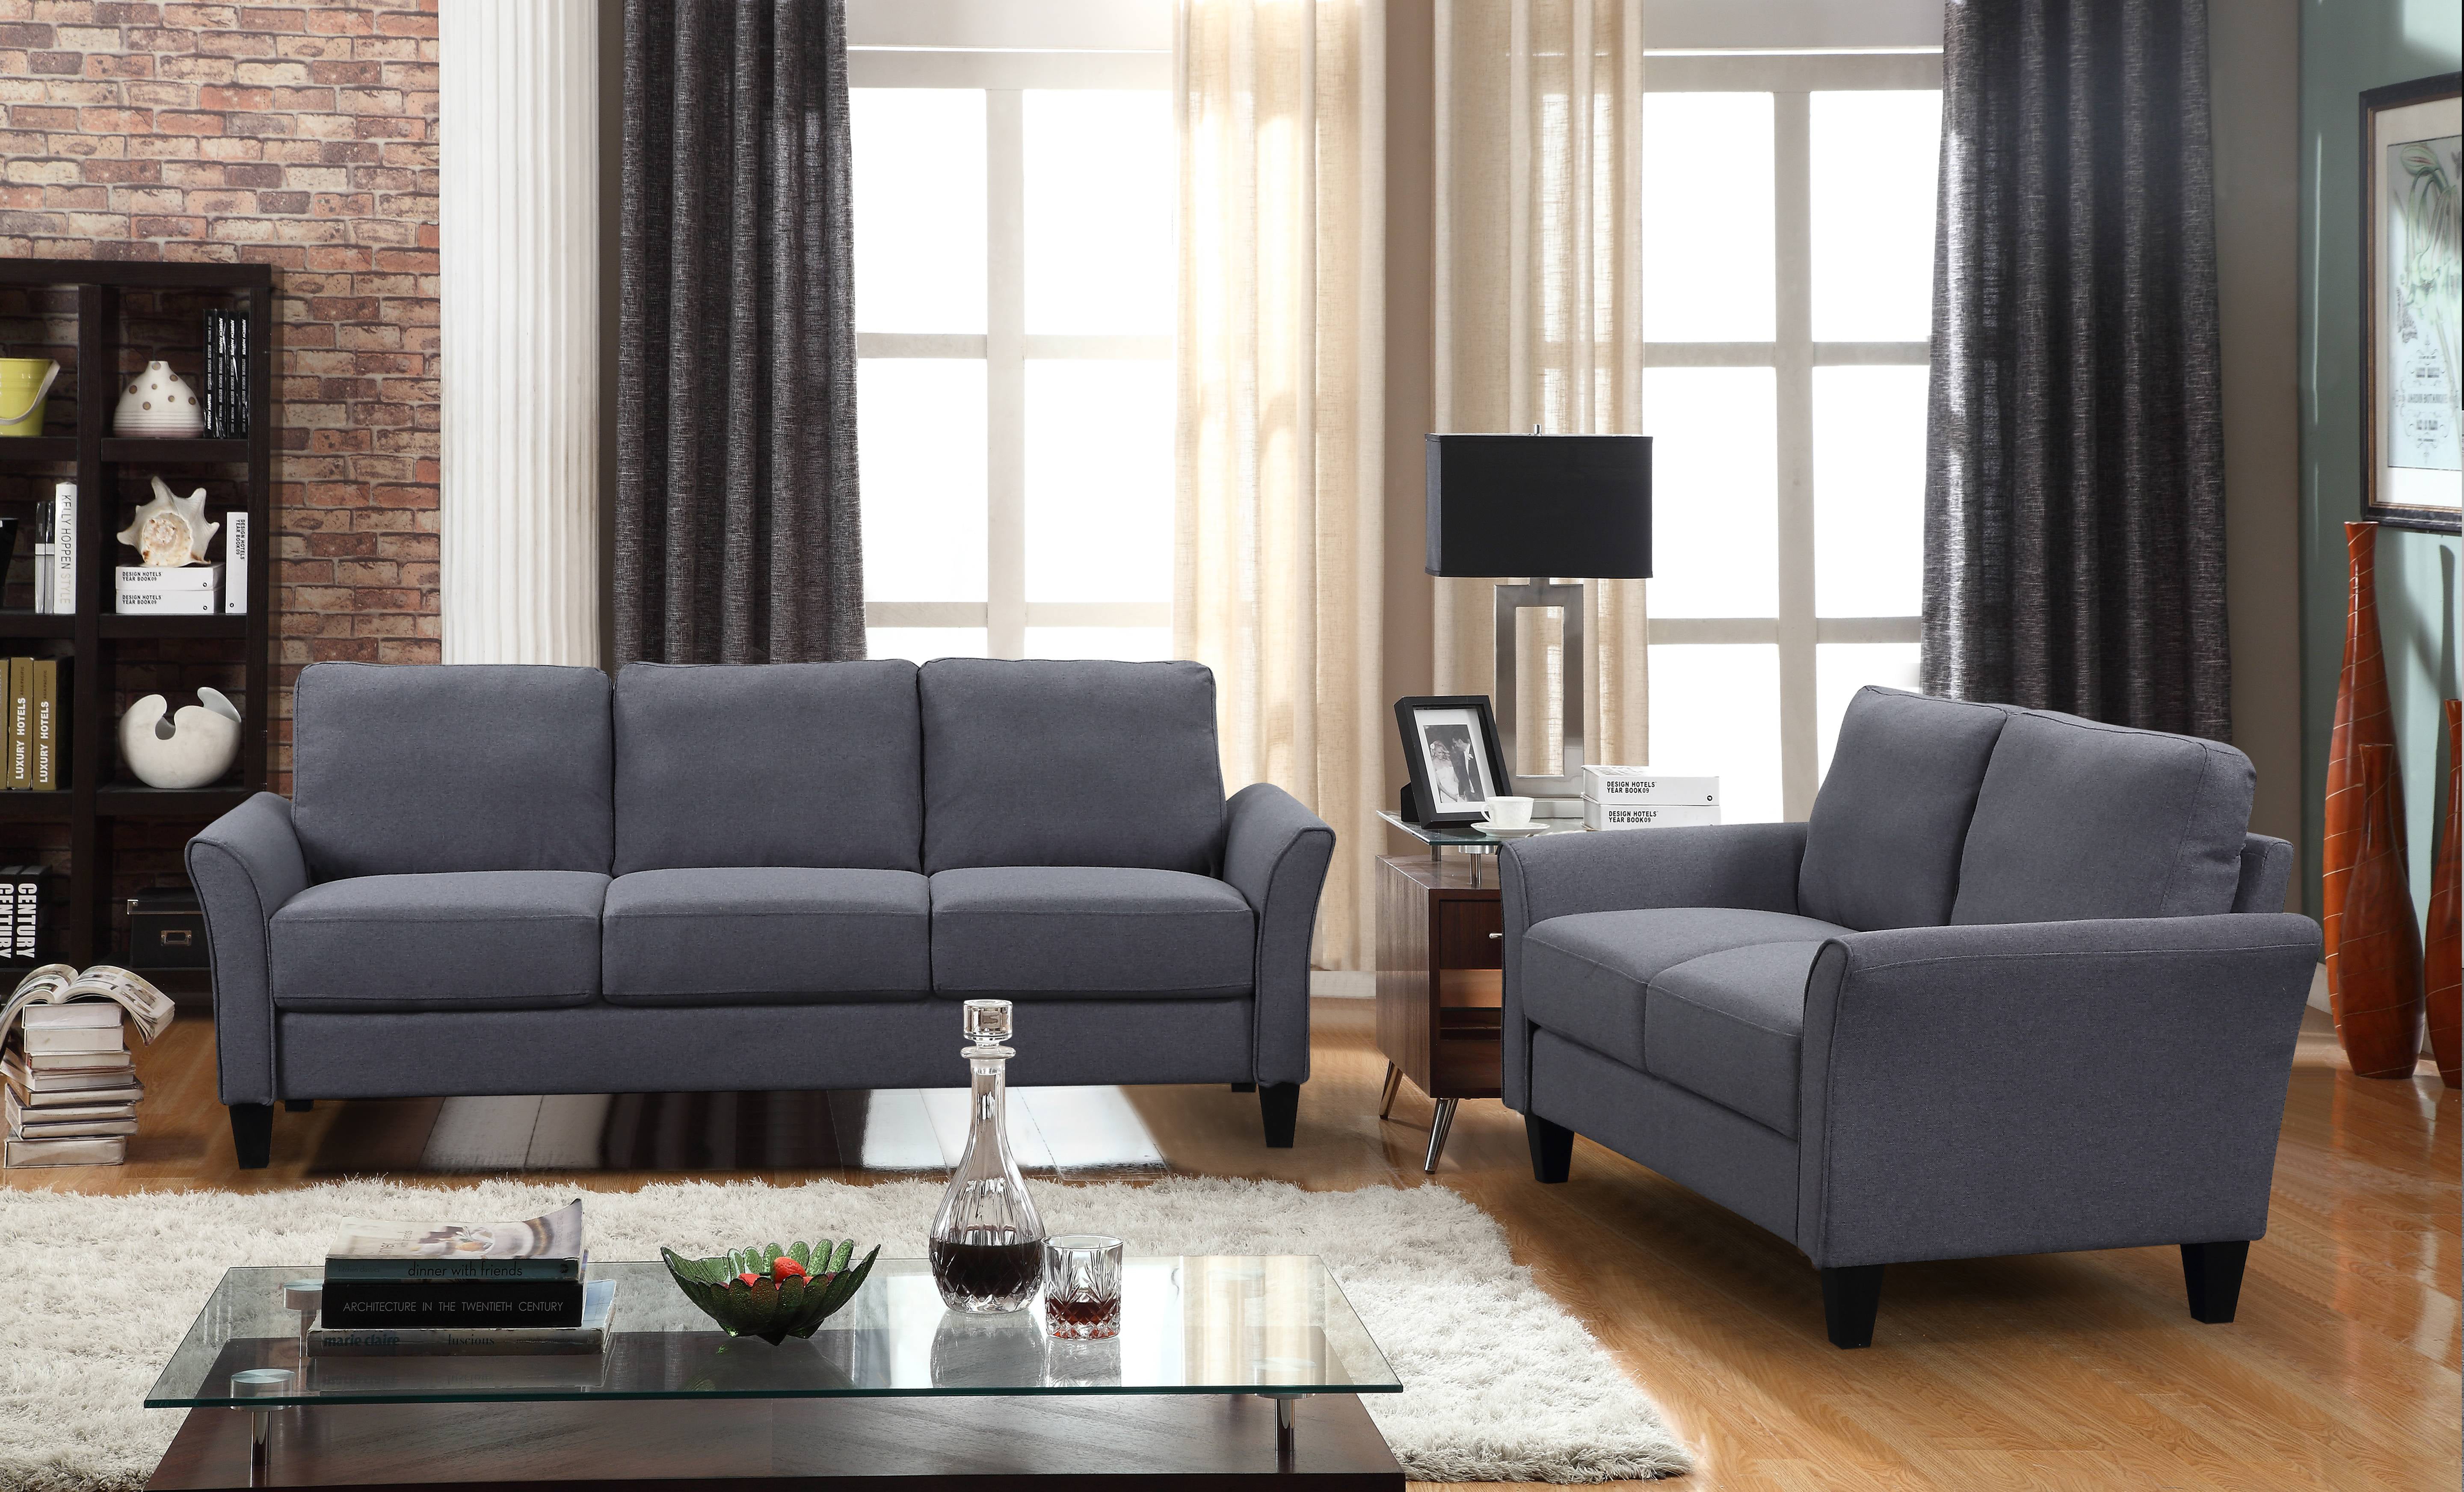 Sofa And Couch - All Images